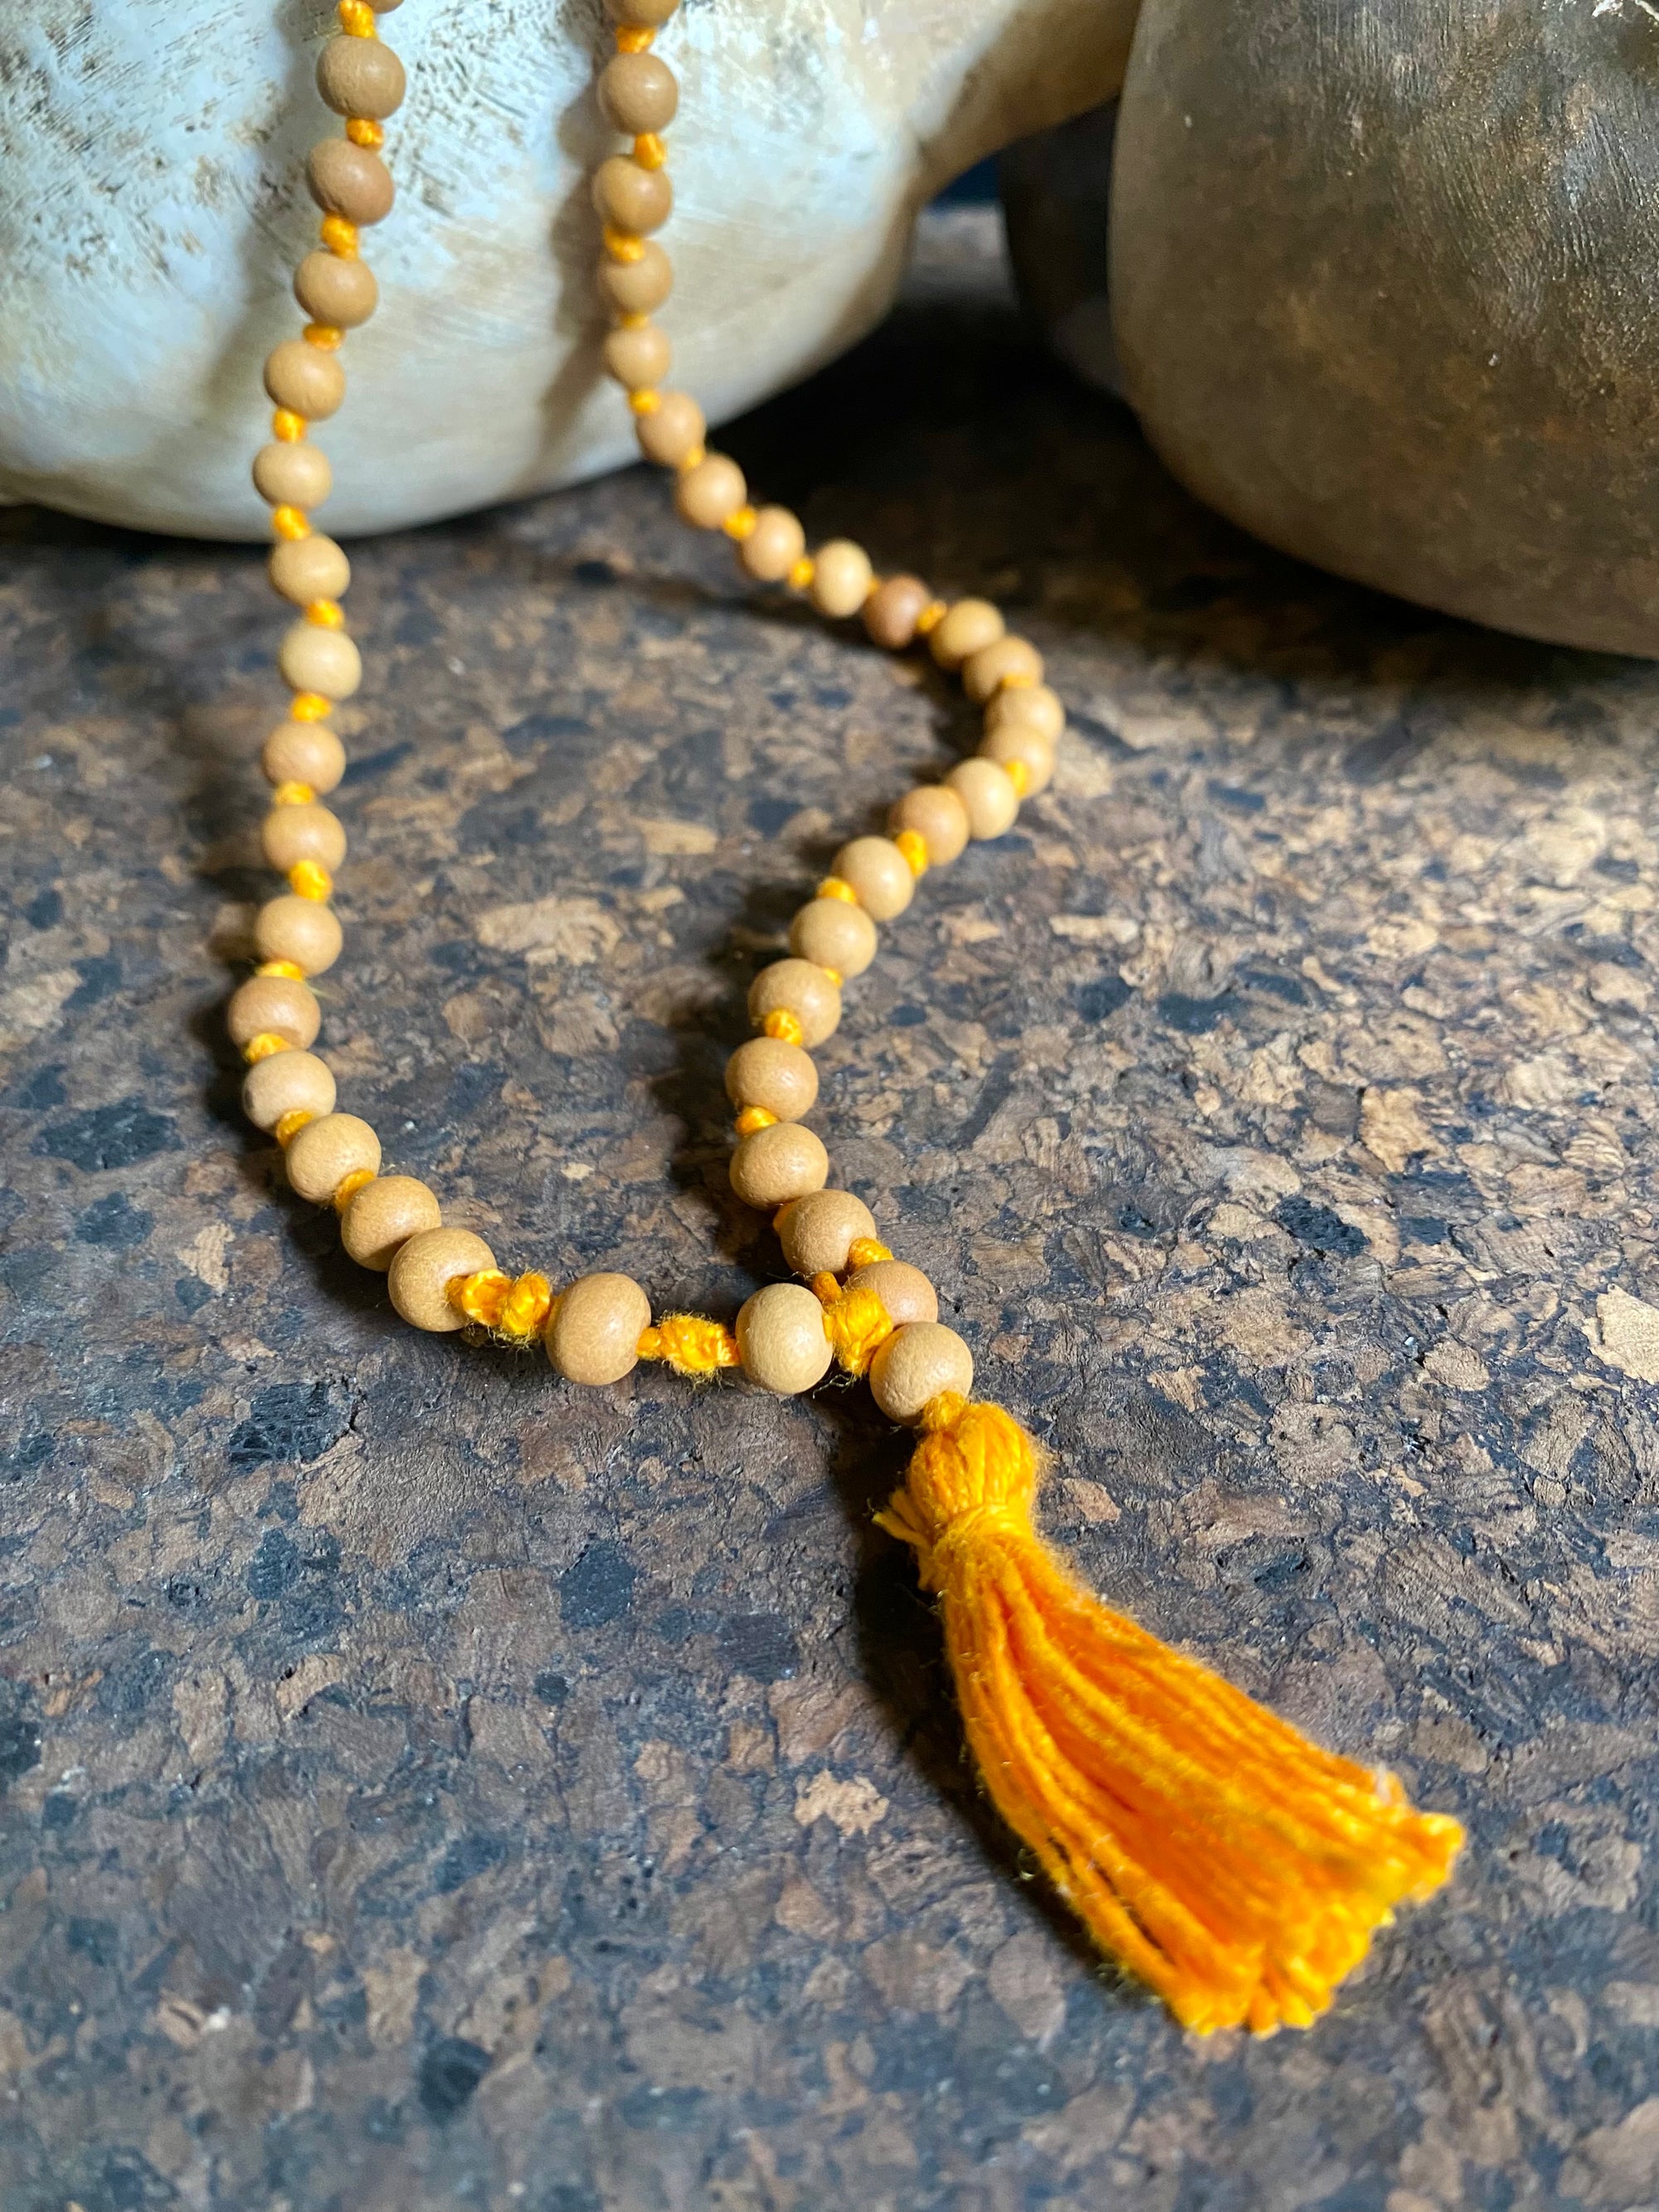 Women or men’s fine sandalwood mala necklace. Made from natural sandalwood. Knotted between each bead. As per a standard Buddhist mala, it contains 108 beads. Each bead 5 mm diameter